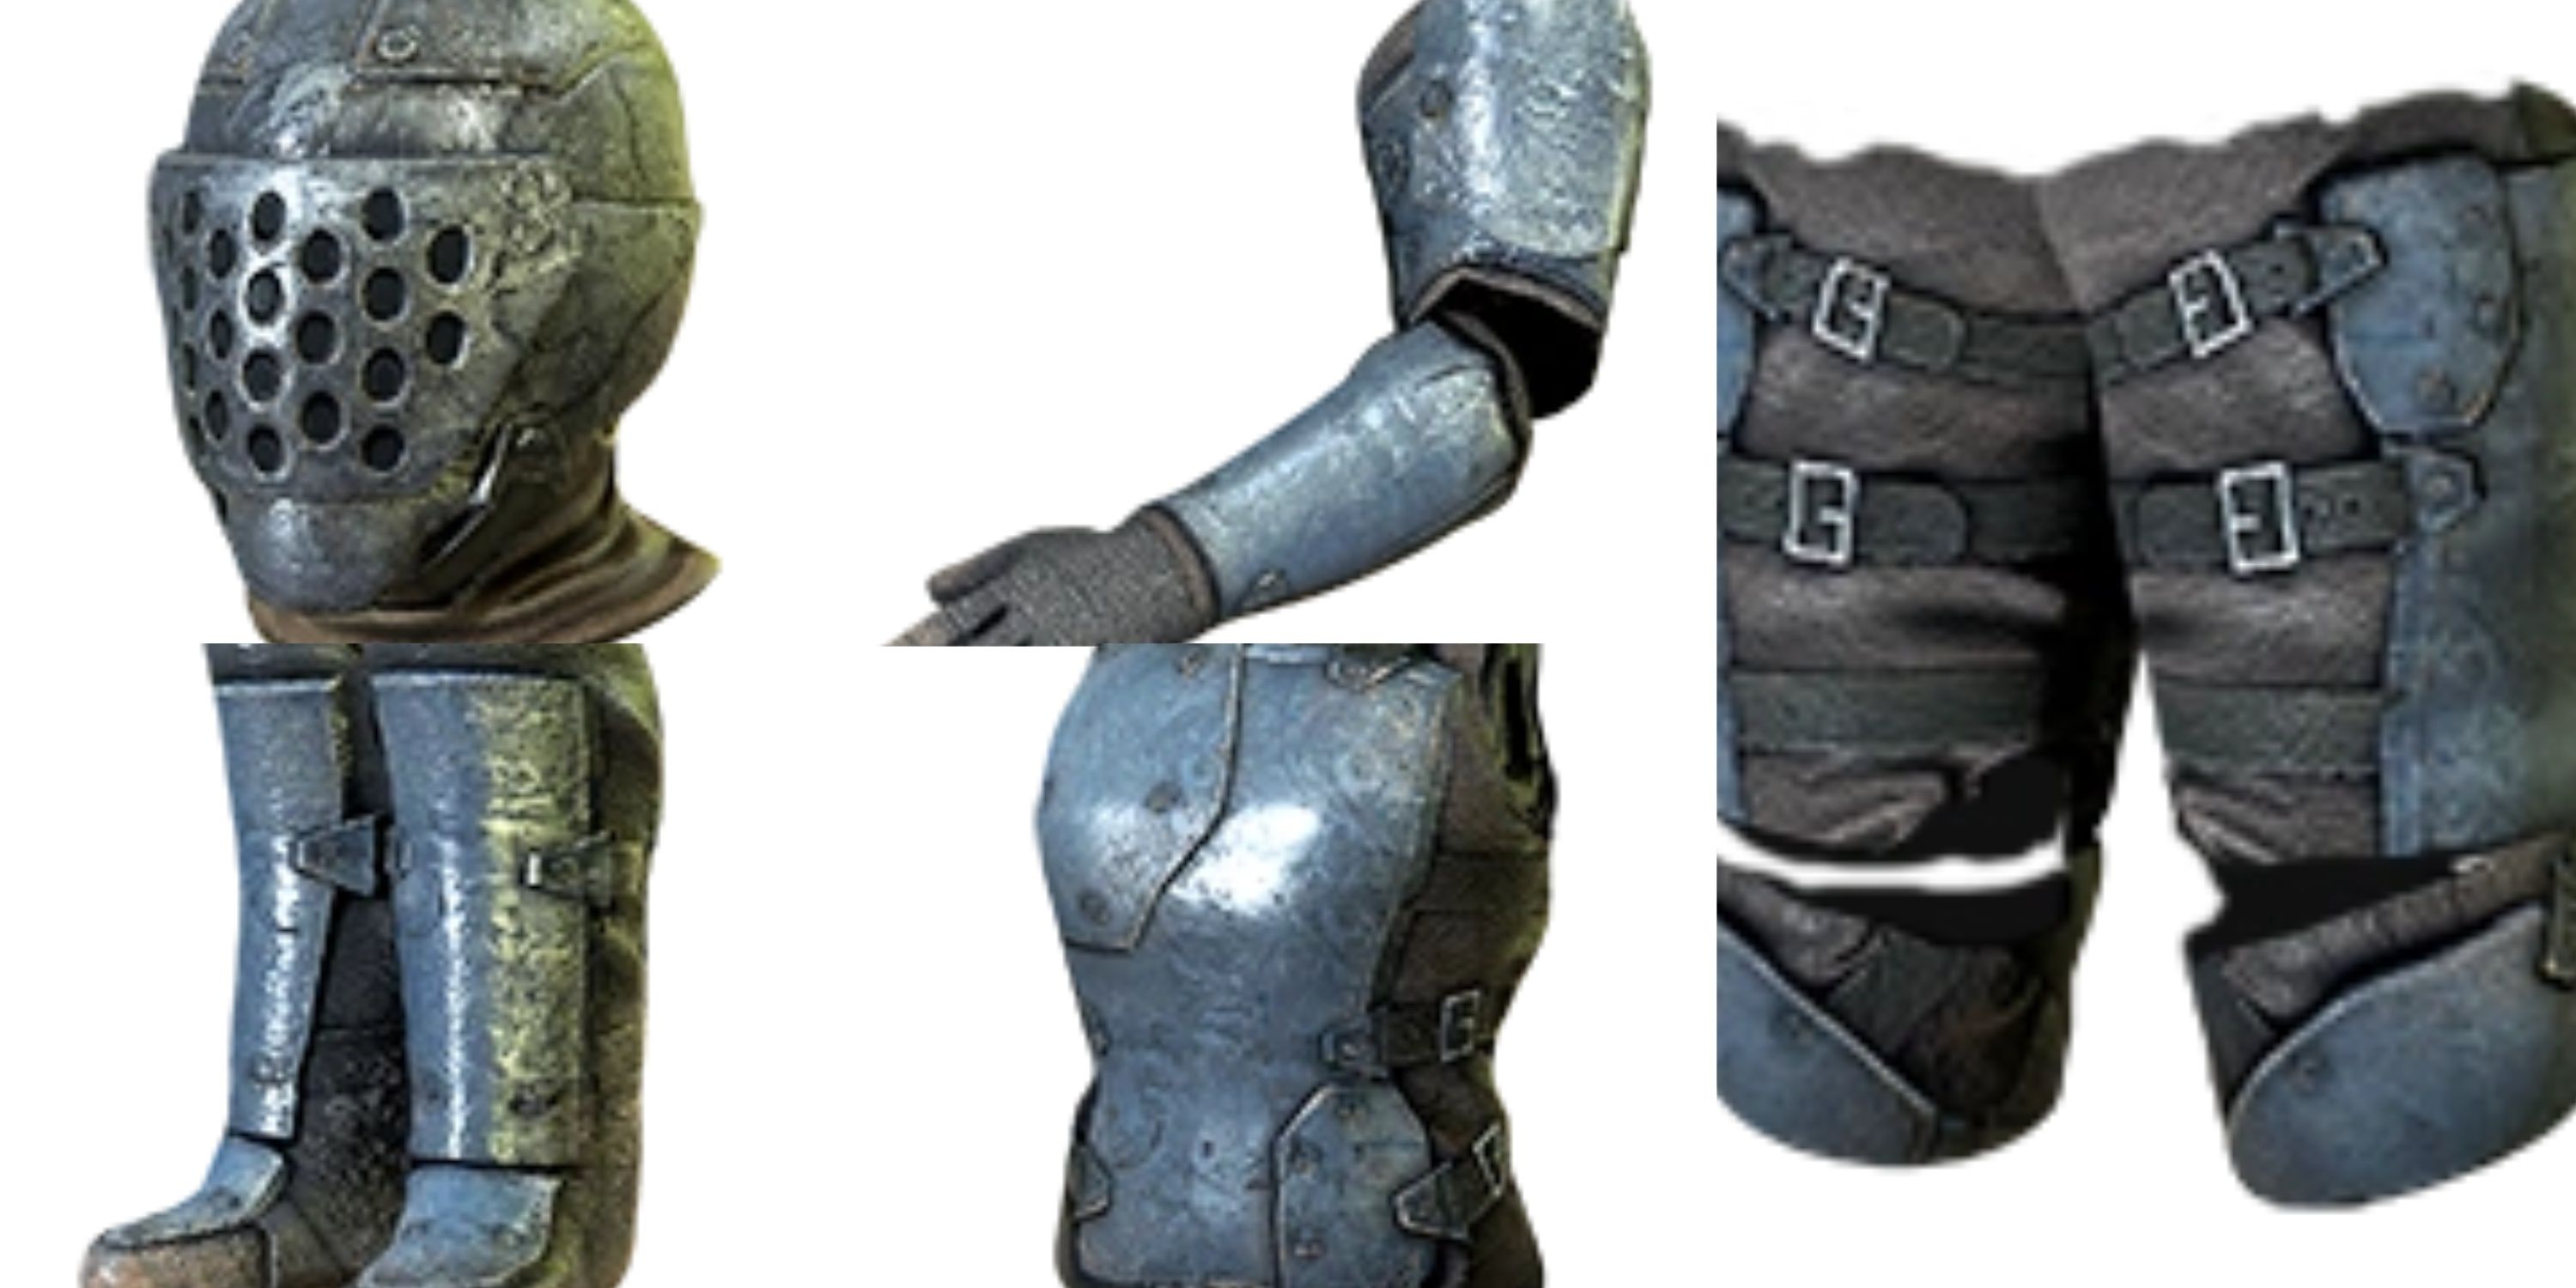 Steel Armor offers the most durability but is one of the loudest and negatively affects stamina and mobility.